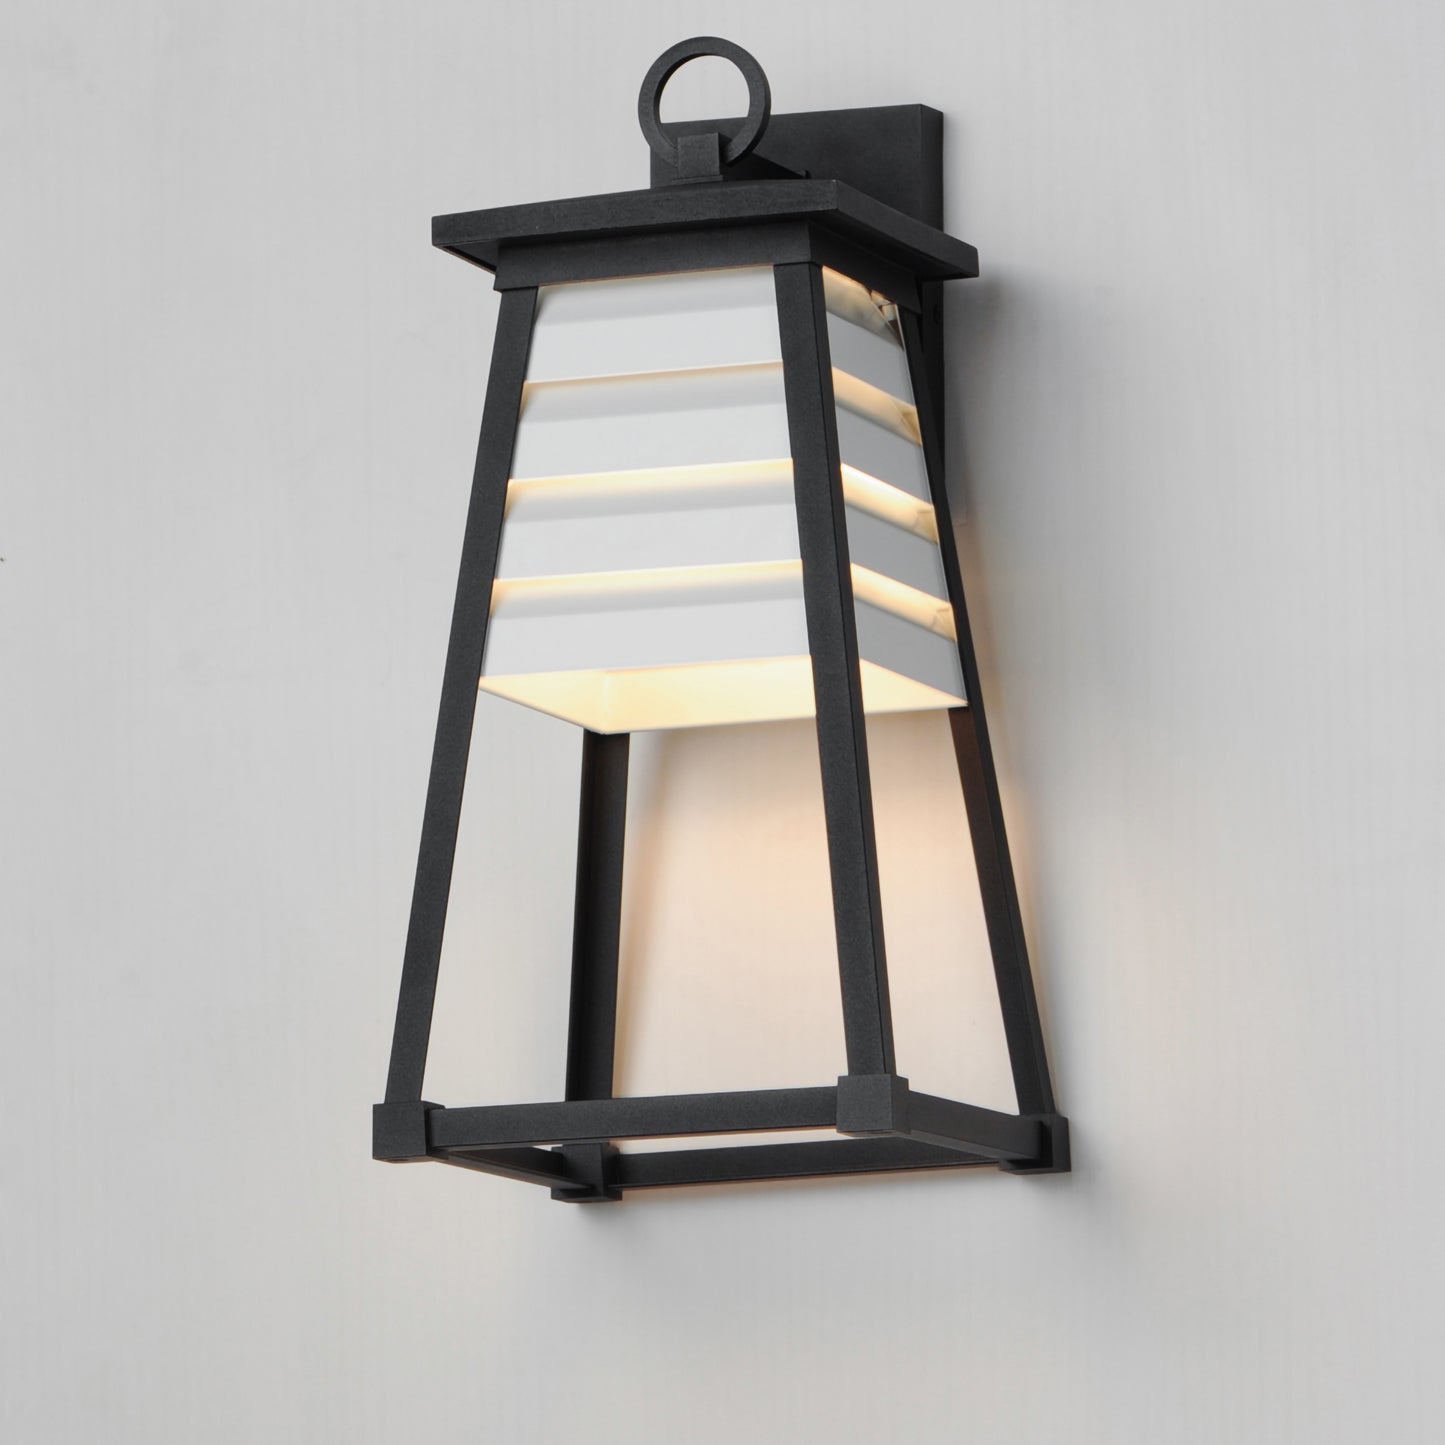 40634WTBK - Shutters 18" Outdoor Wall Sconce - White / Black